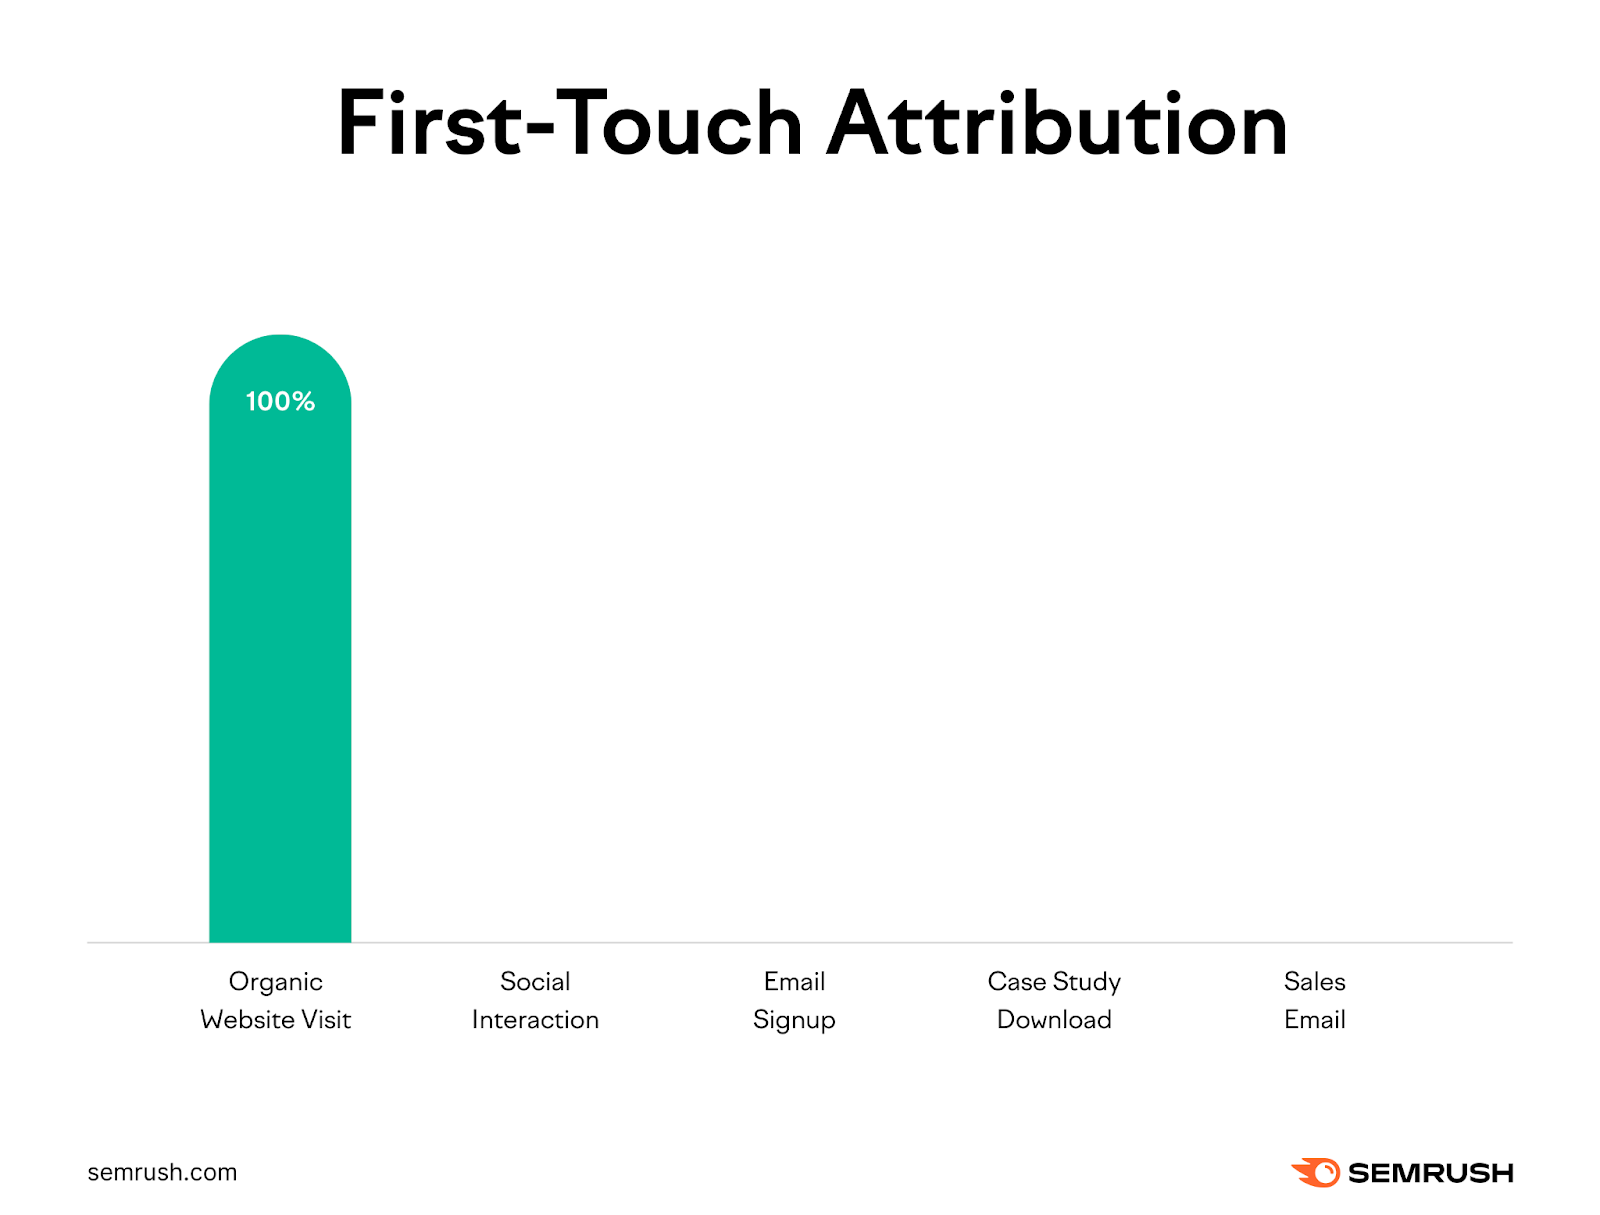 First-touch attribution assigns all credit to the first touchpoint.